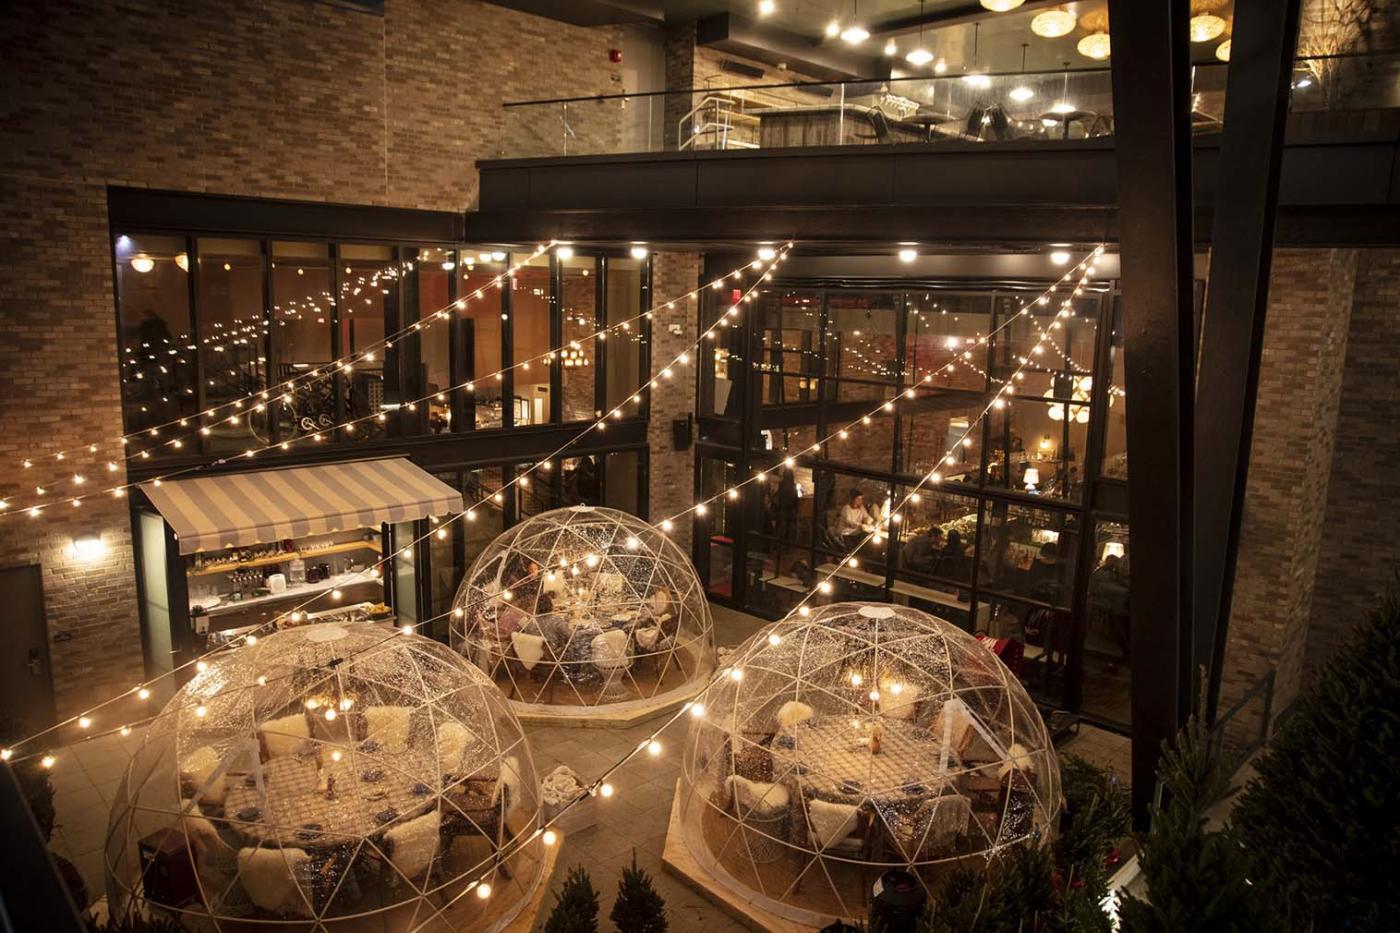 Have dinner inside a bubble.